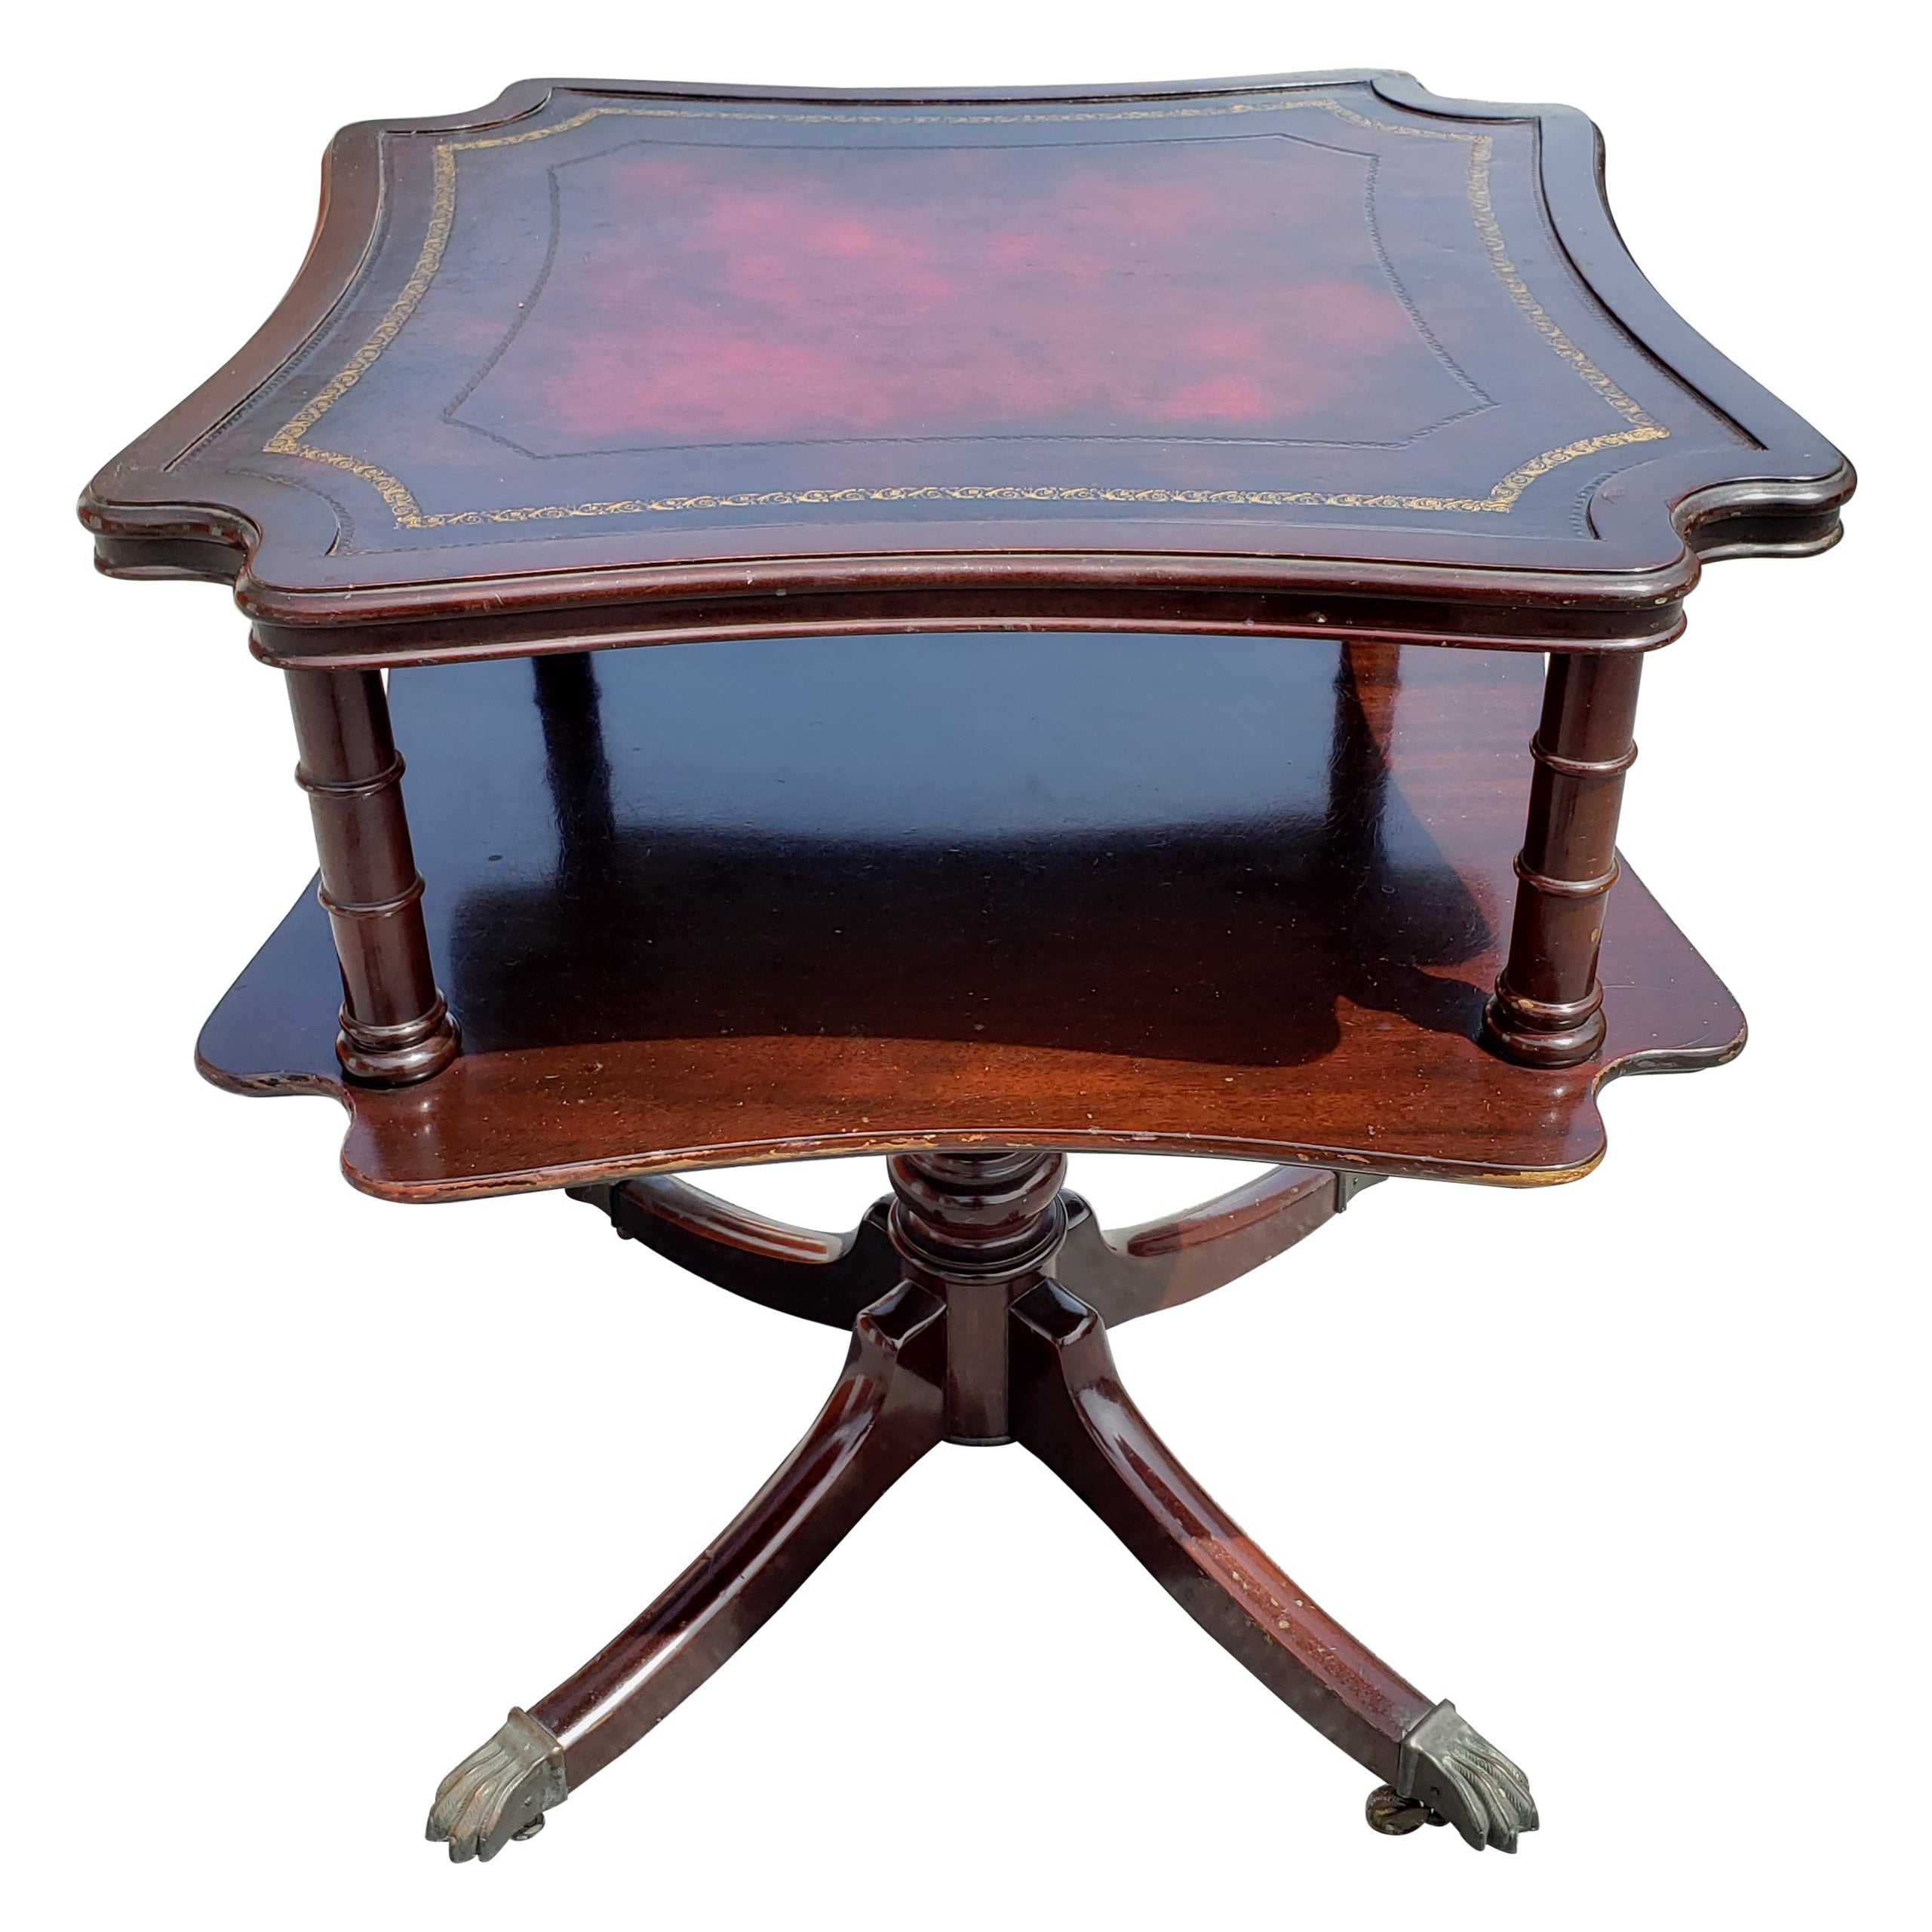 French Regency Style Two-Tier Red Leather Top Mahogany Tea Table